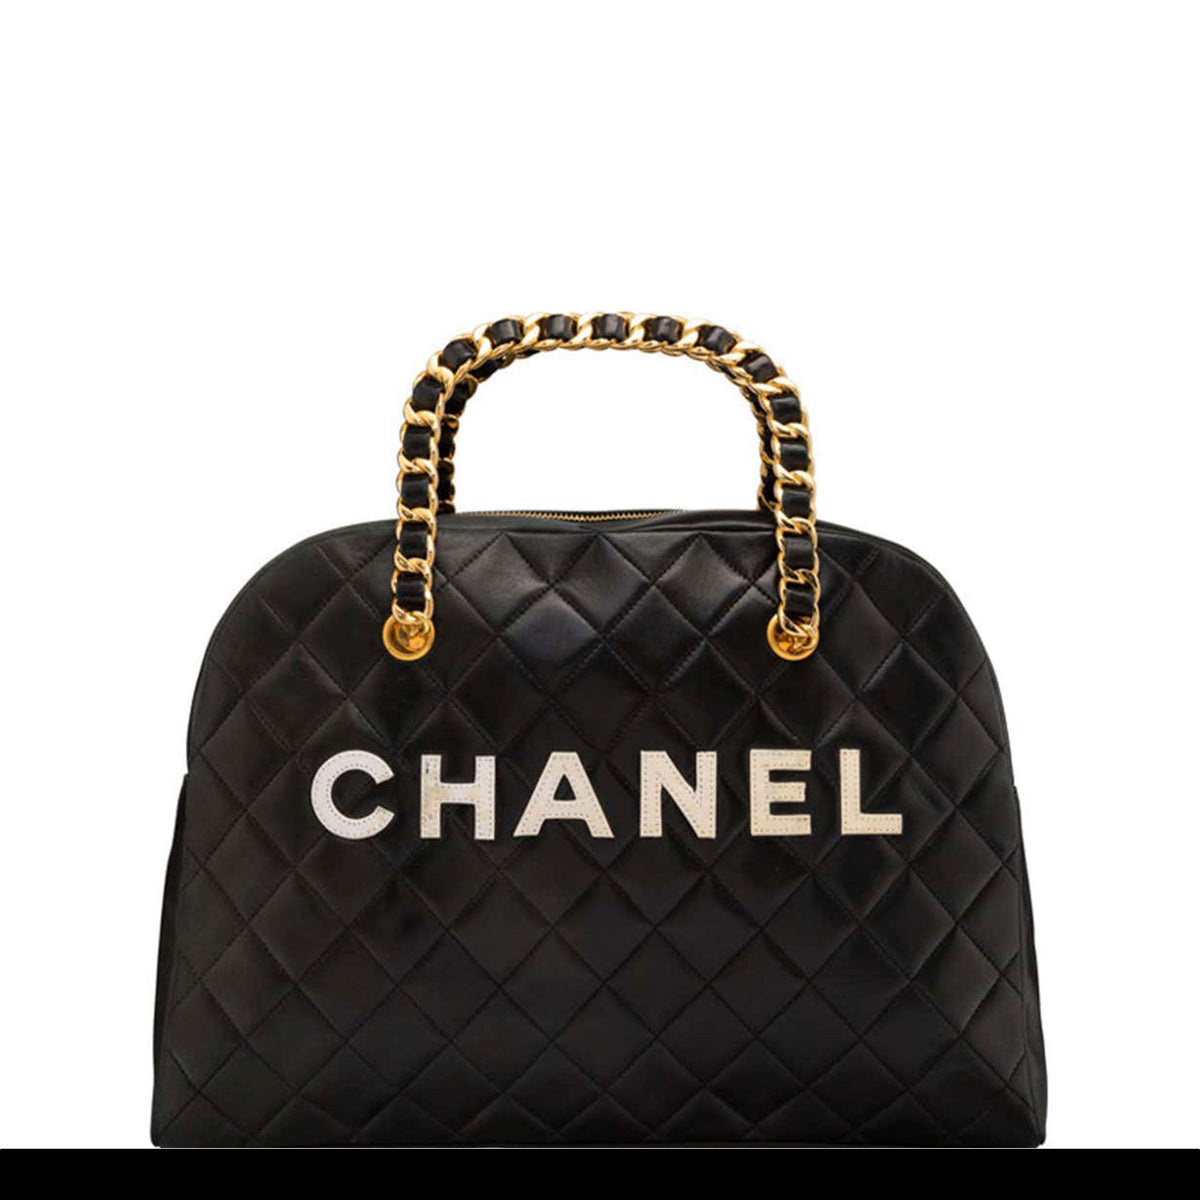 Chanel Quilted Lambskin Bowler Bag, Chanel Handbags